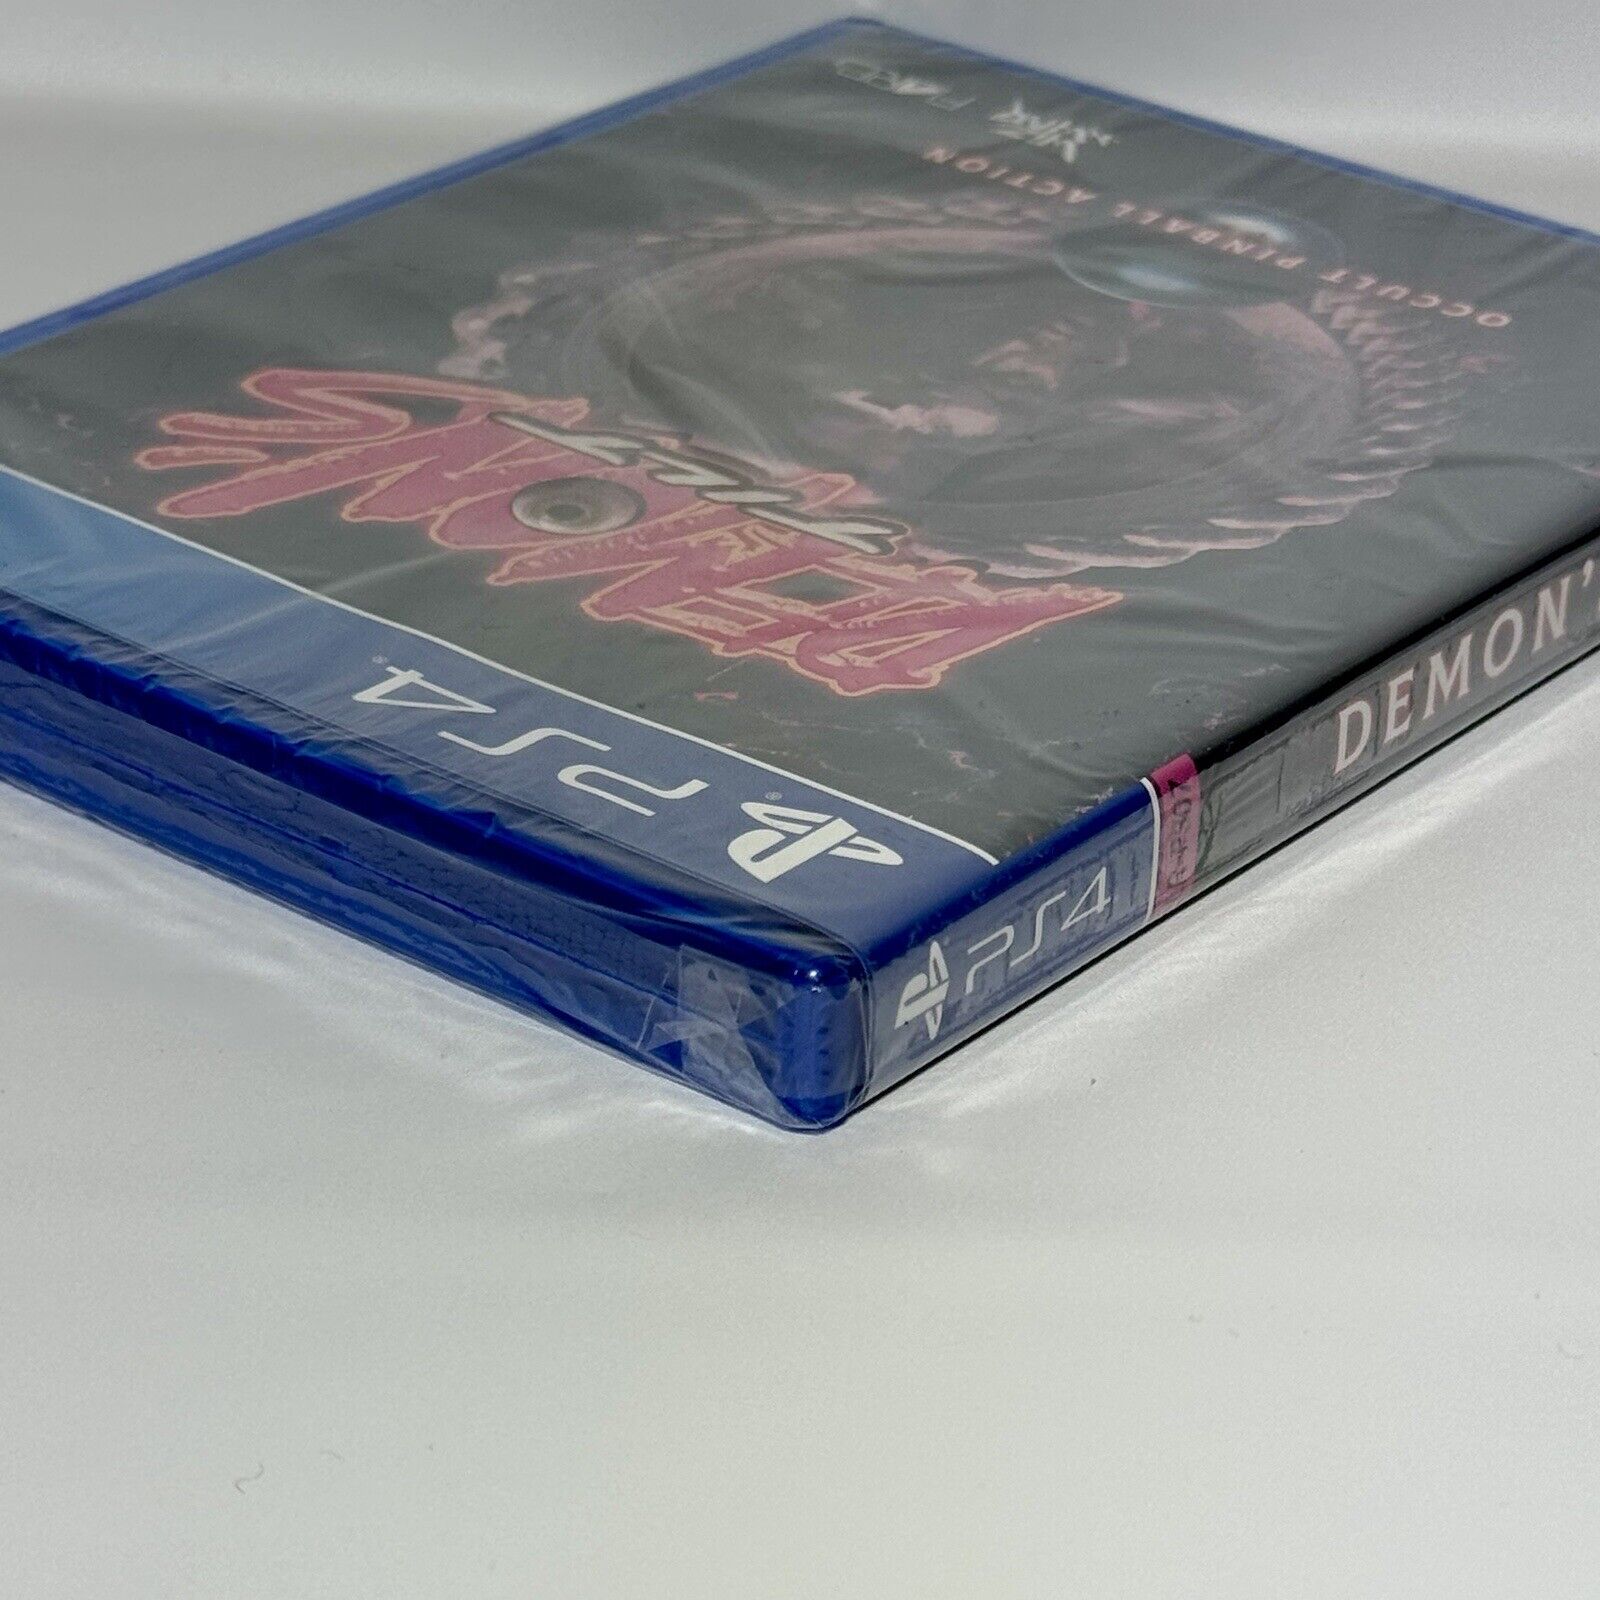 NEW, Factory Sealed PS4, Demon's Tilt, Limited Run #428, w/ Card #028, Free Ship